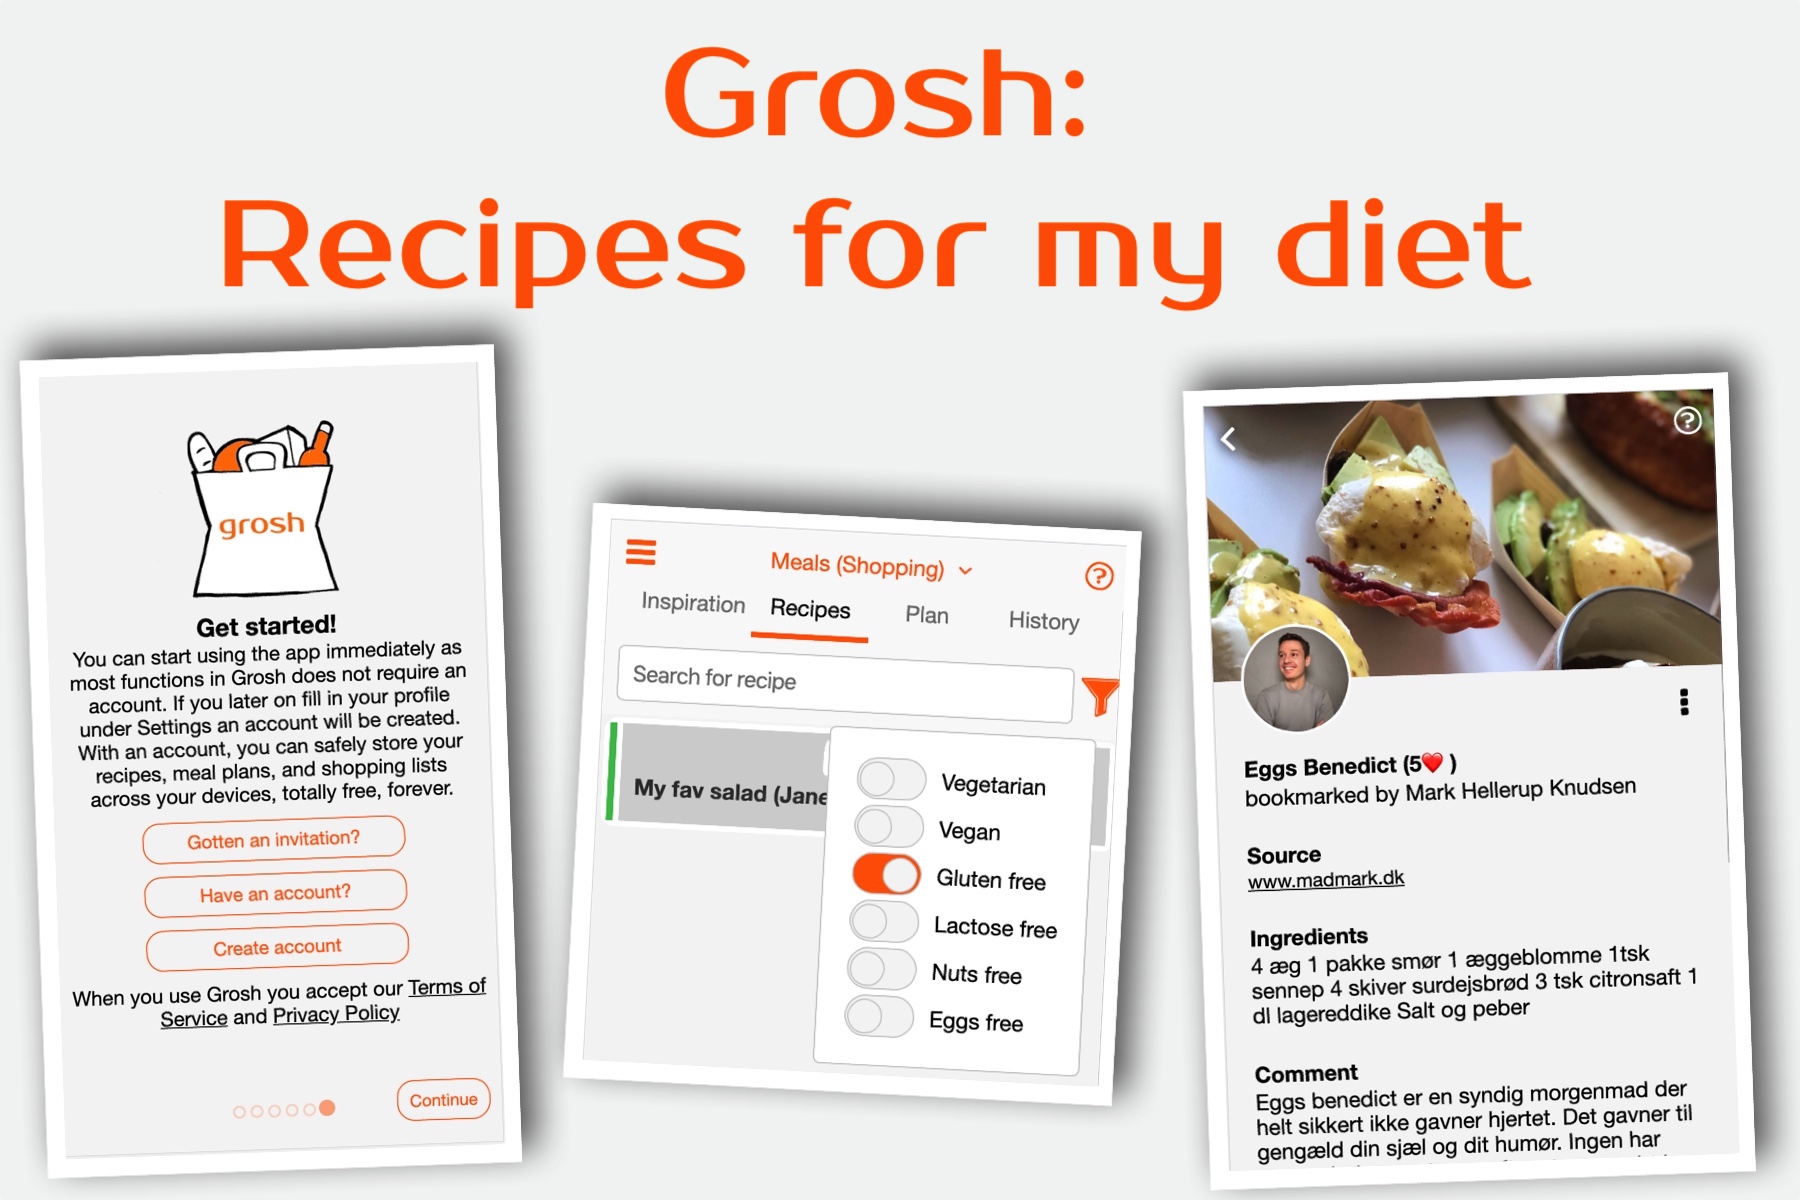 Grocery app Grosh with recipes for my diet